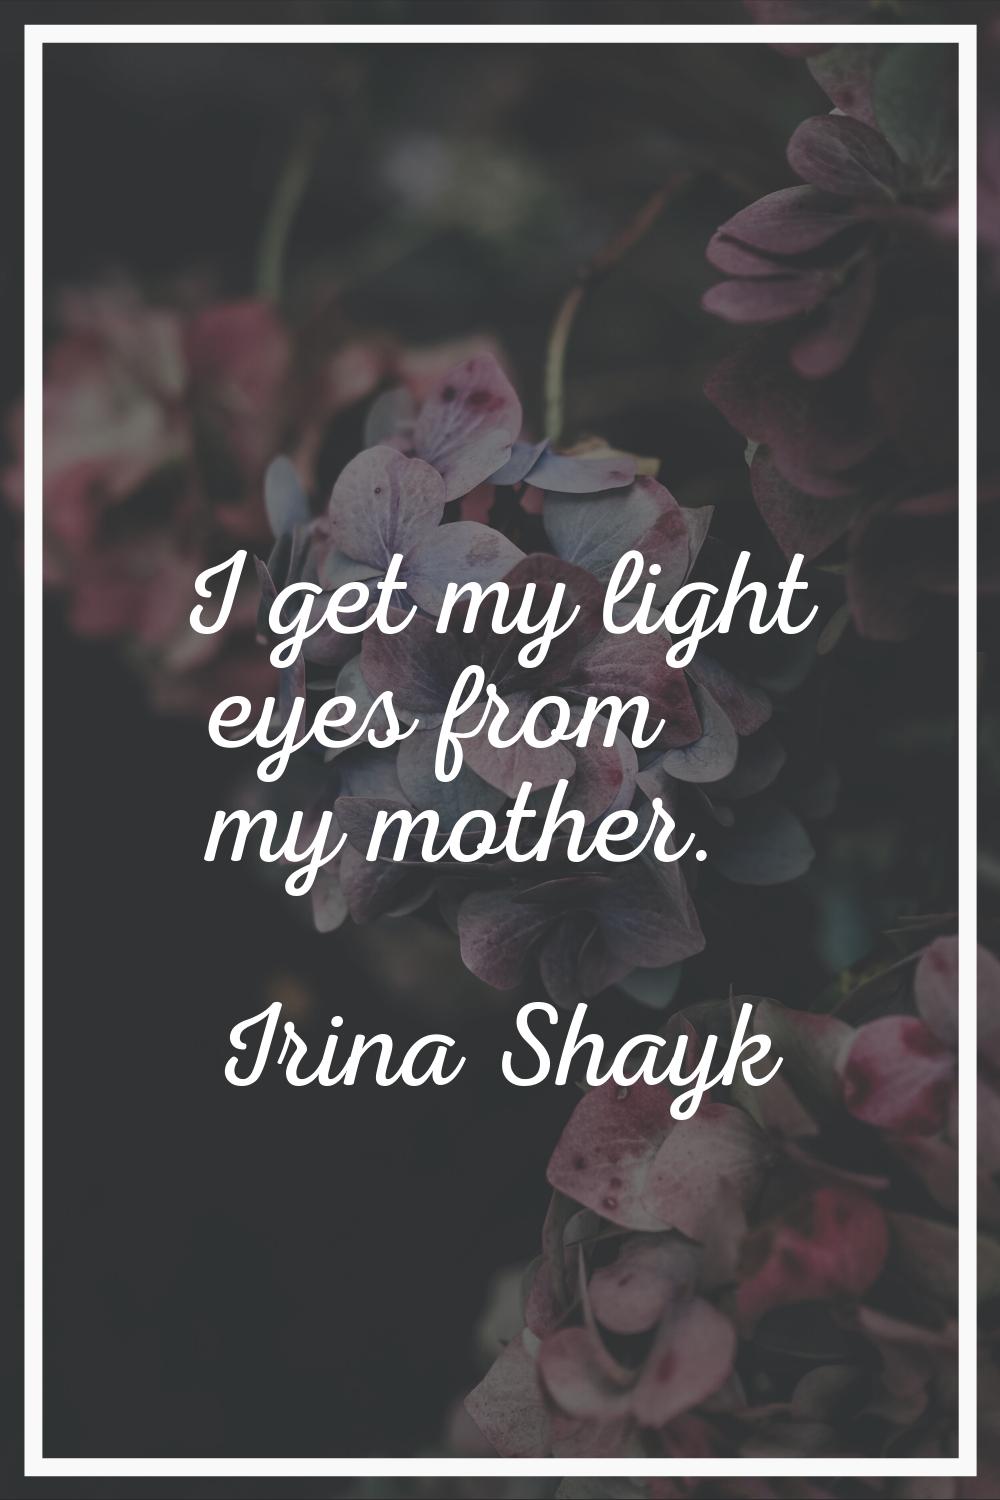 I get my light eyes from my mother.